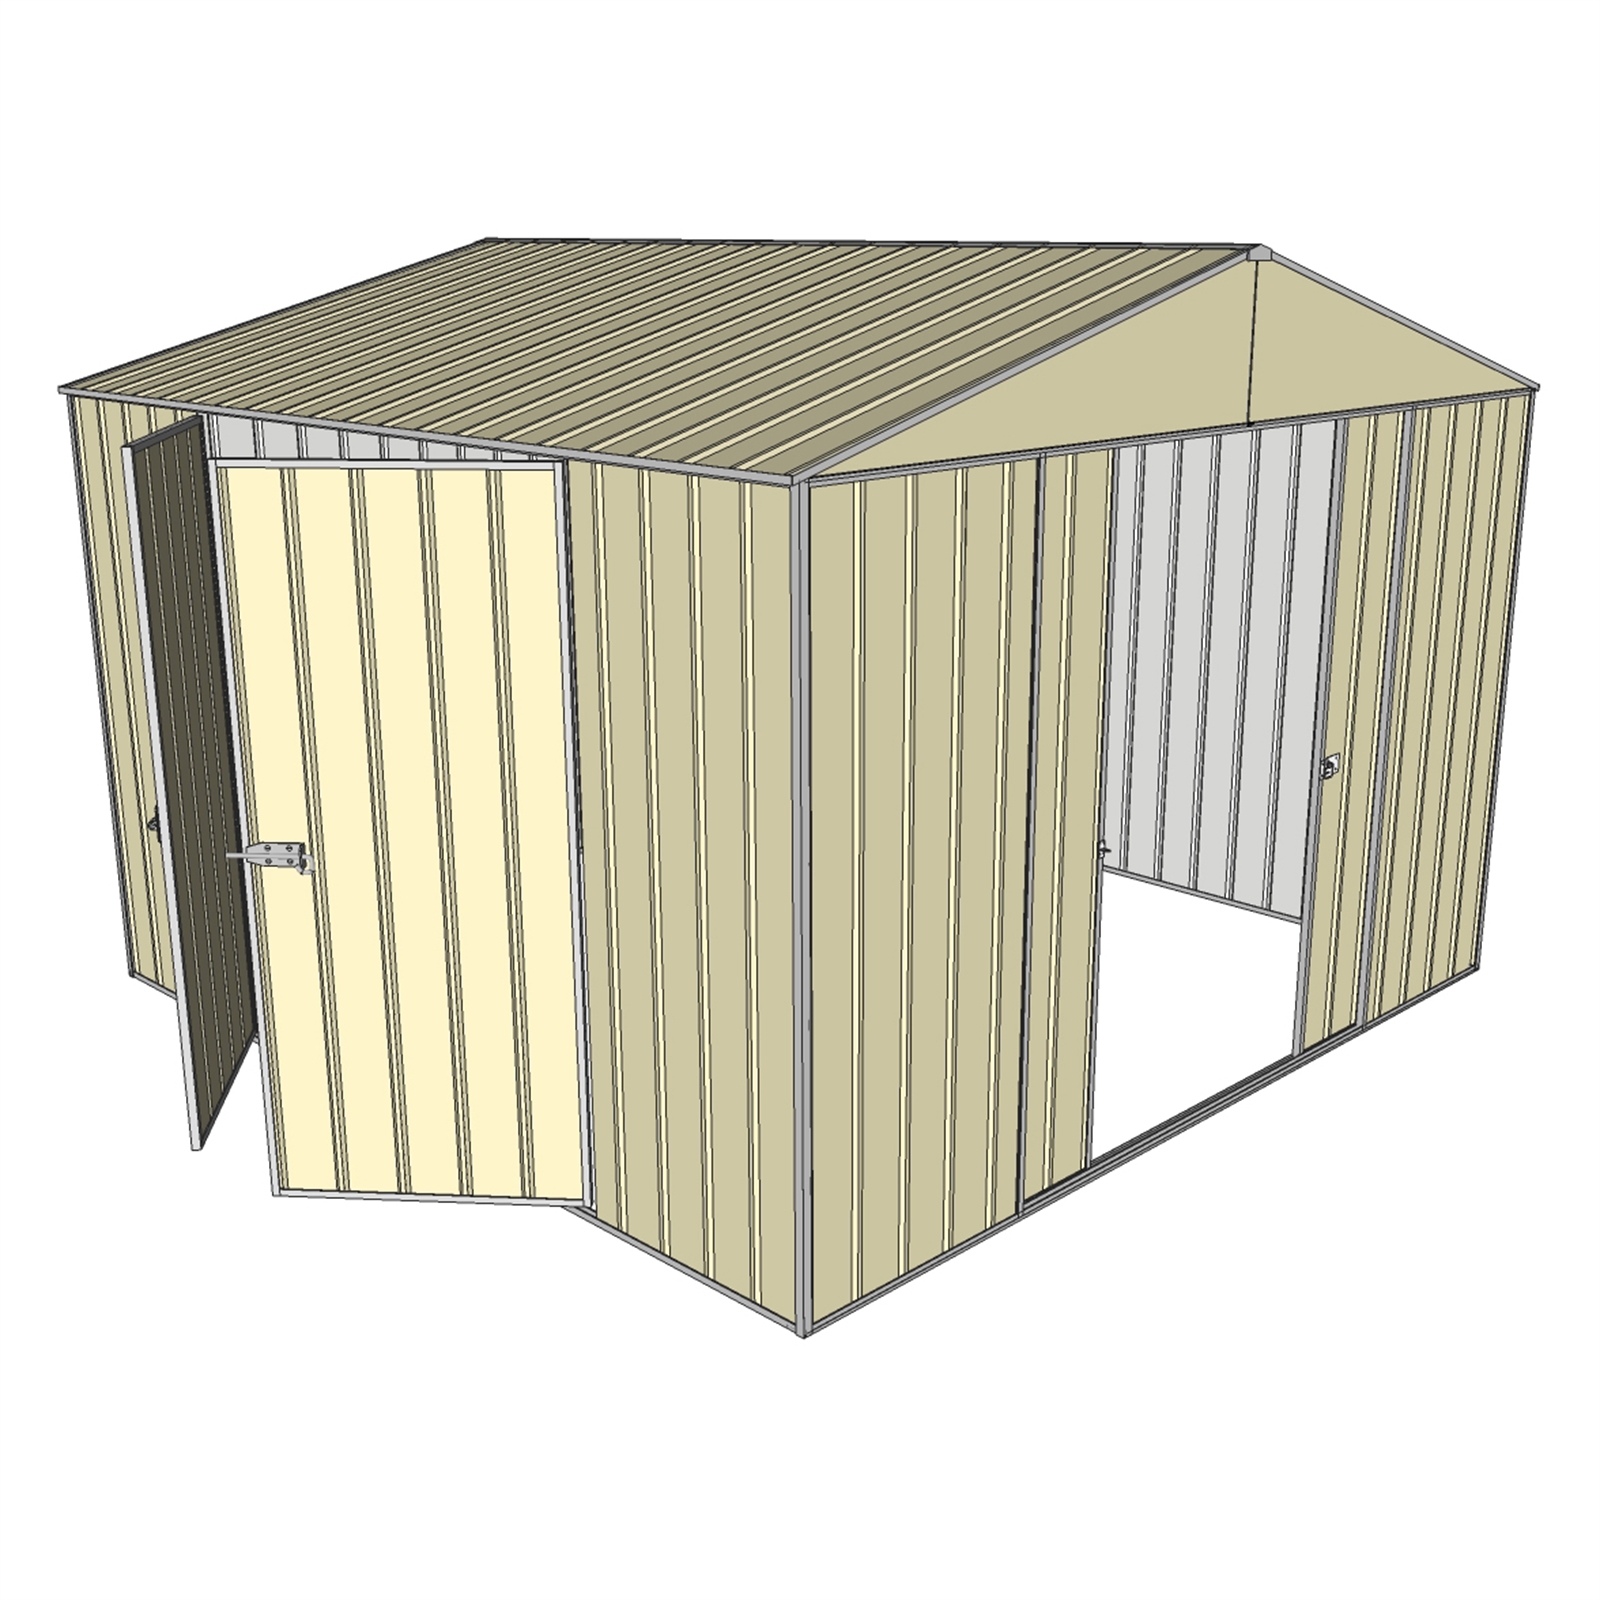 Build-a-Shed 3.0 x 3.0 x 2.3m Cream Double Sliding and Double Hinge Door Shed